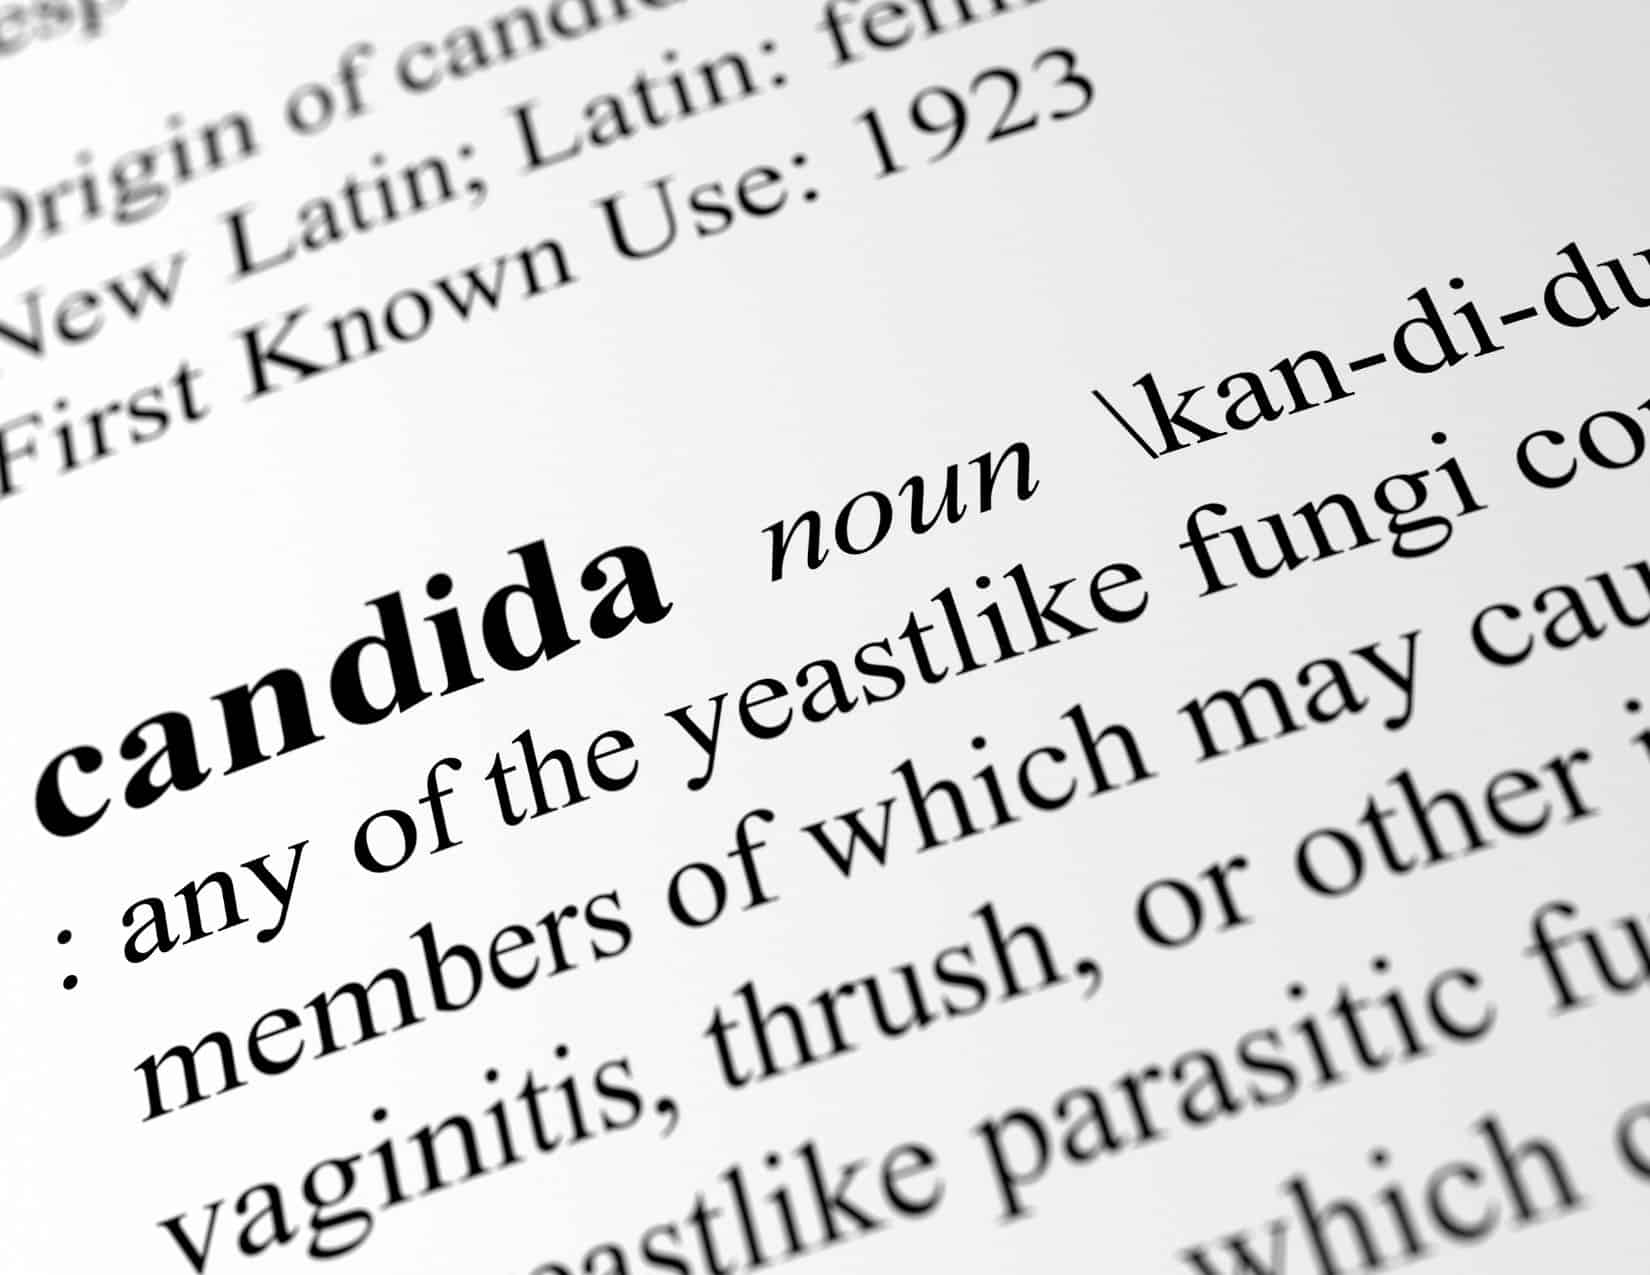 Candida in Autism and ADHD